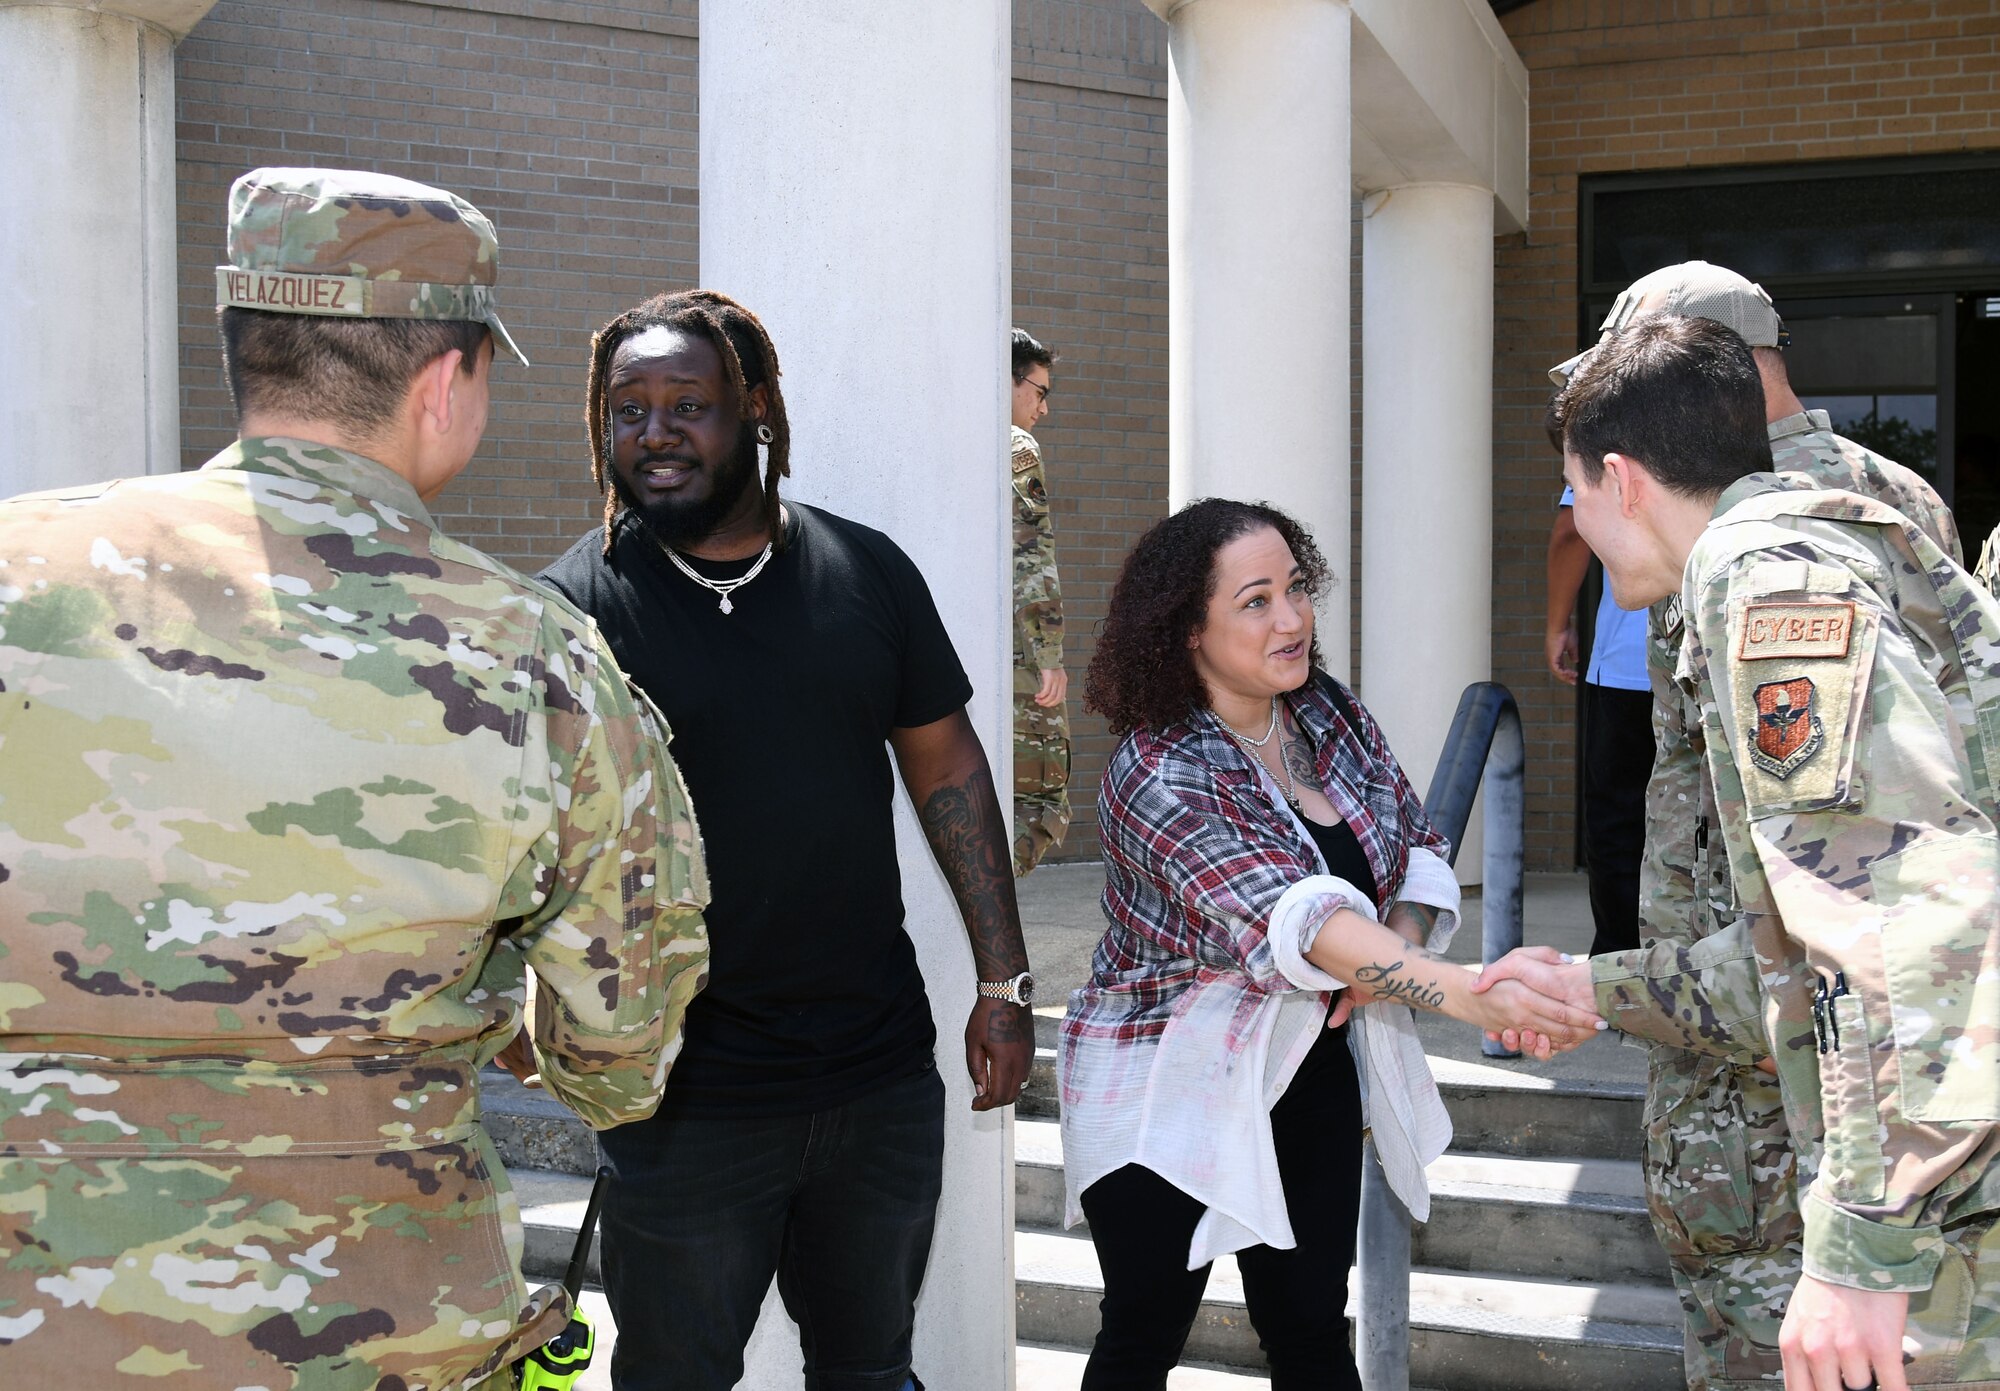 Amber Najm and her husband, T-Pain, an American rapper, meet Airmen following a tour of the 81st Communications Squadron at Keesler Air Force Base, Mississippi, May 19, 2022. Amber served in the Air Force and was assigned to the 81st CS from 2001-2004. (U.S. Air Force photo by Kemberly Groue)